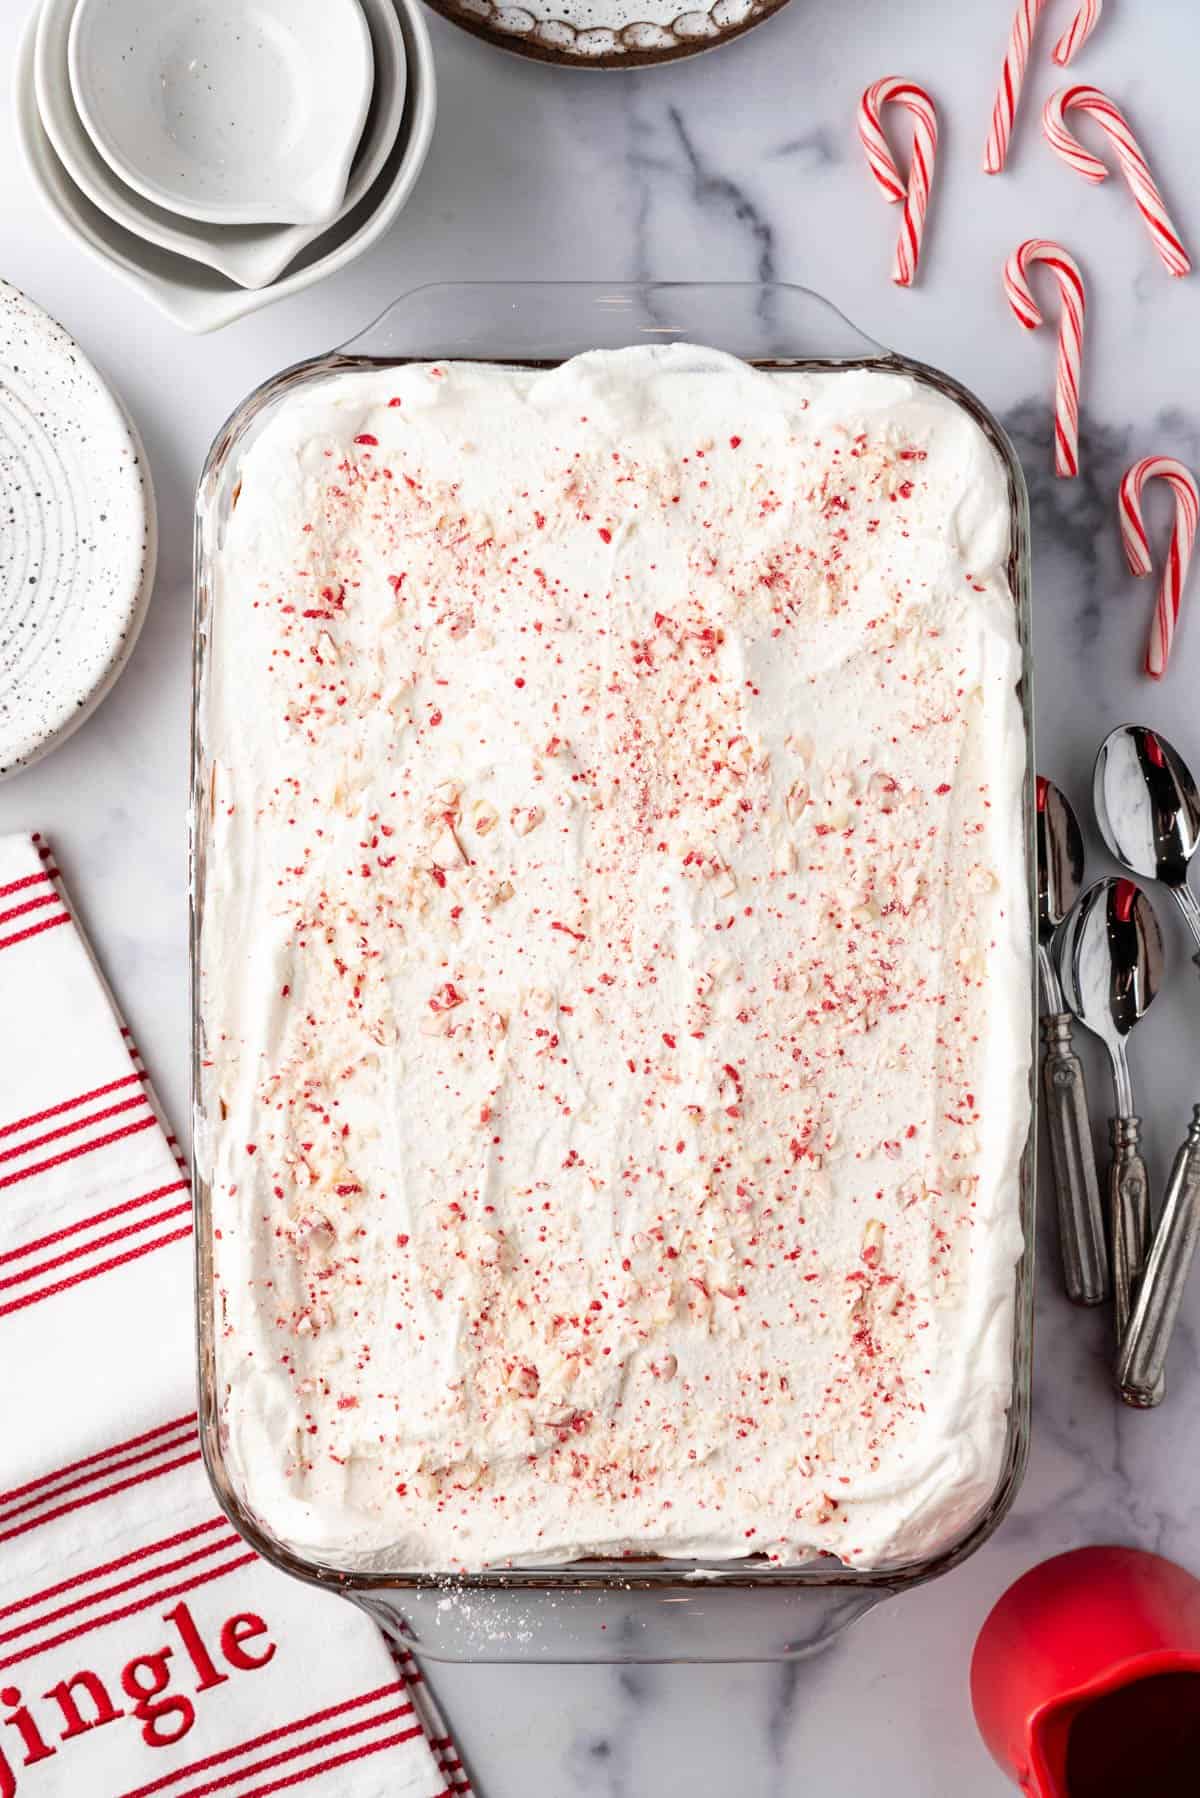 A finished chocolate peppermint lasagna with more chopped candy cane kisses sprinkled on top.